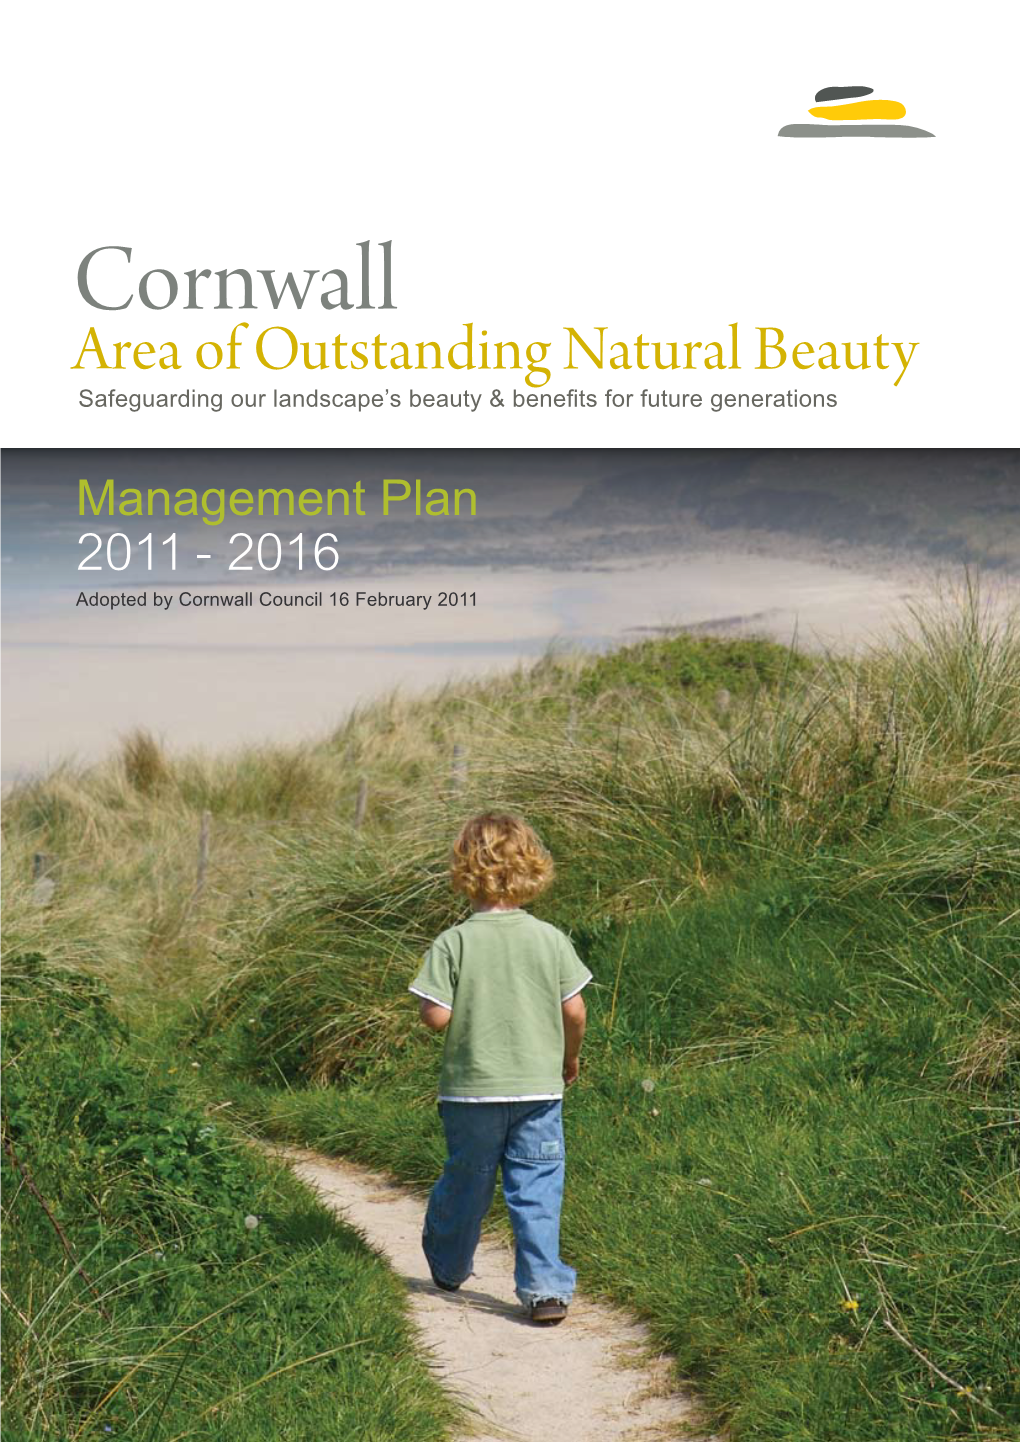 Cornwall Area of Outstanding Natural Beauty Safeguarding Our Landscape’S Beauty & Benefits for Future Generations